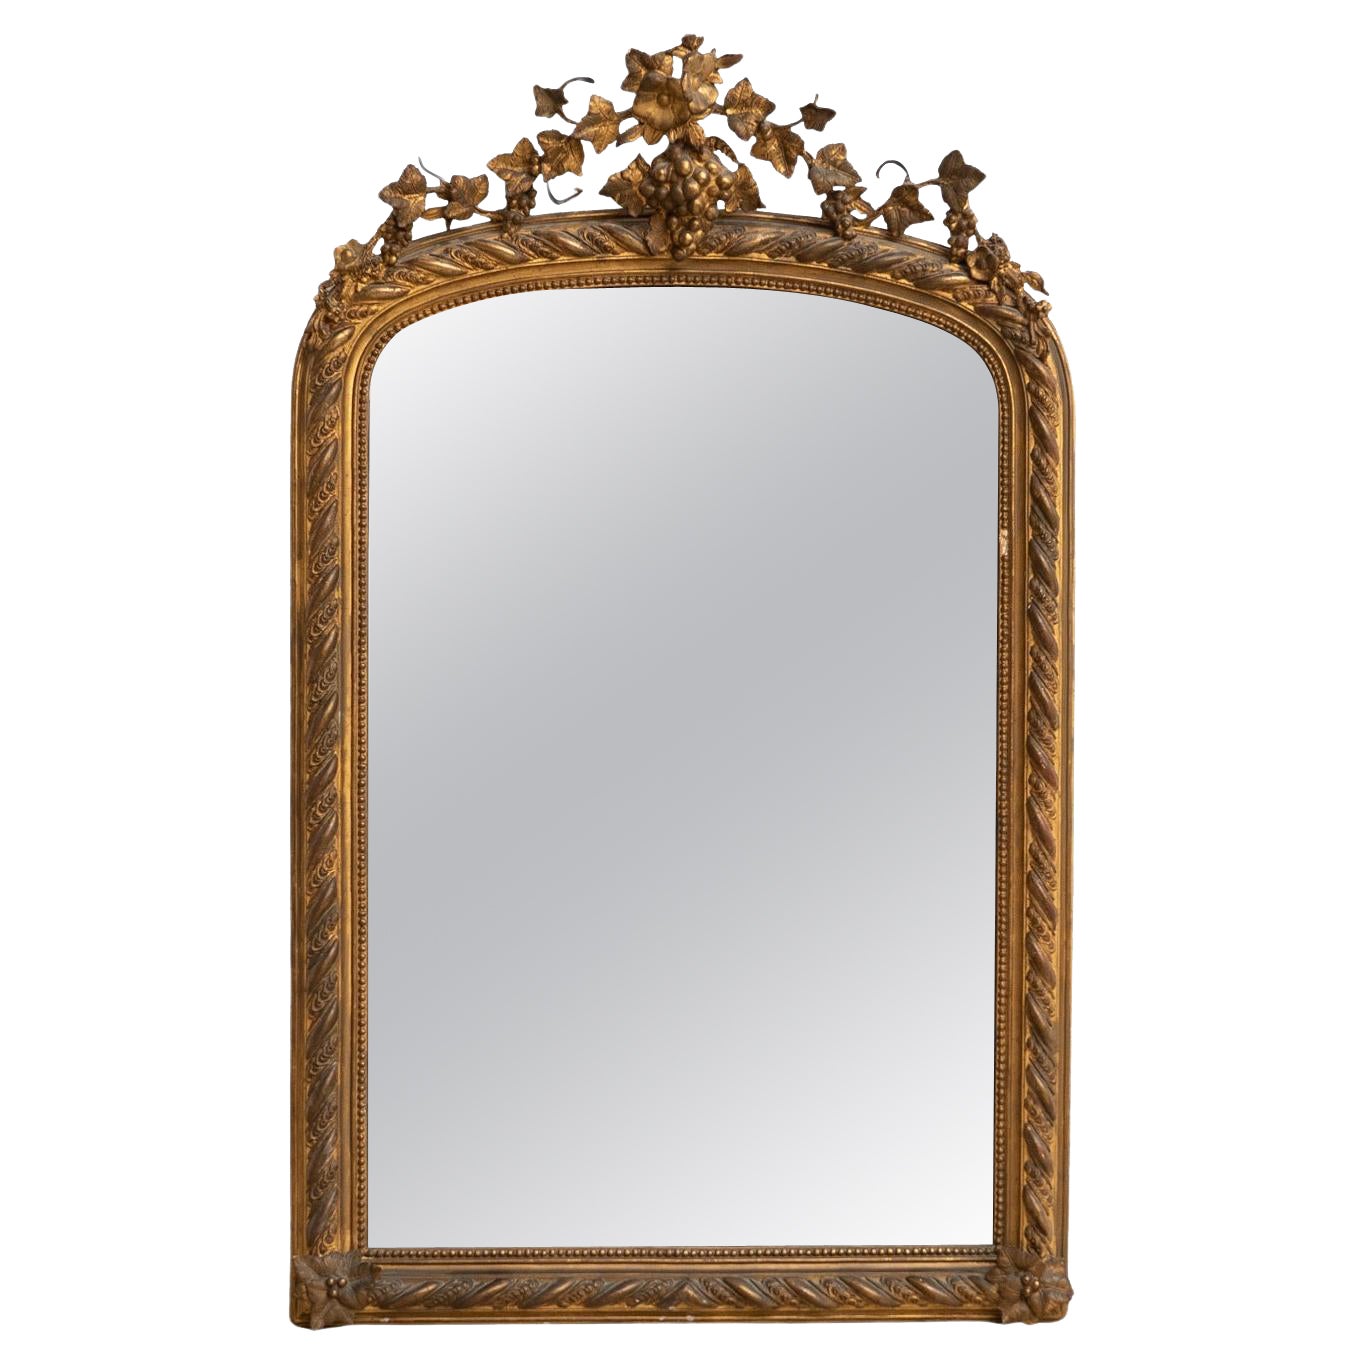 Antique Napoleon III Style Gilded Wood and Stucco Mirror, Early 20th Century